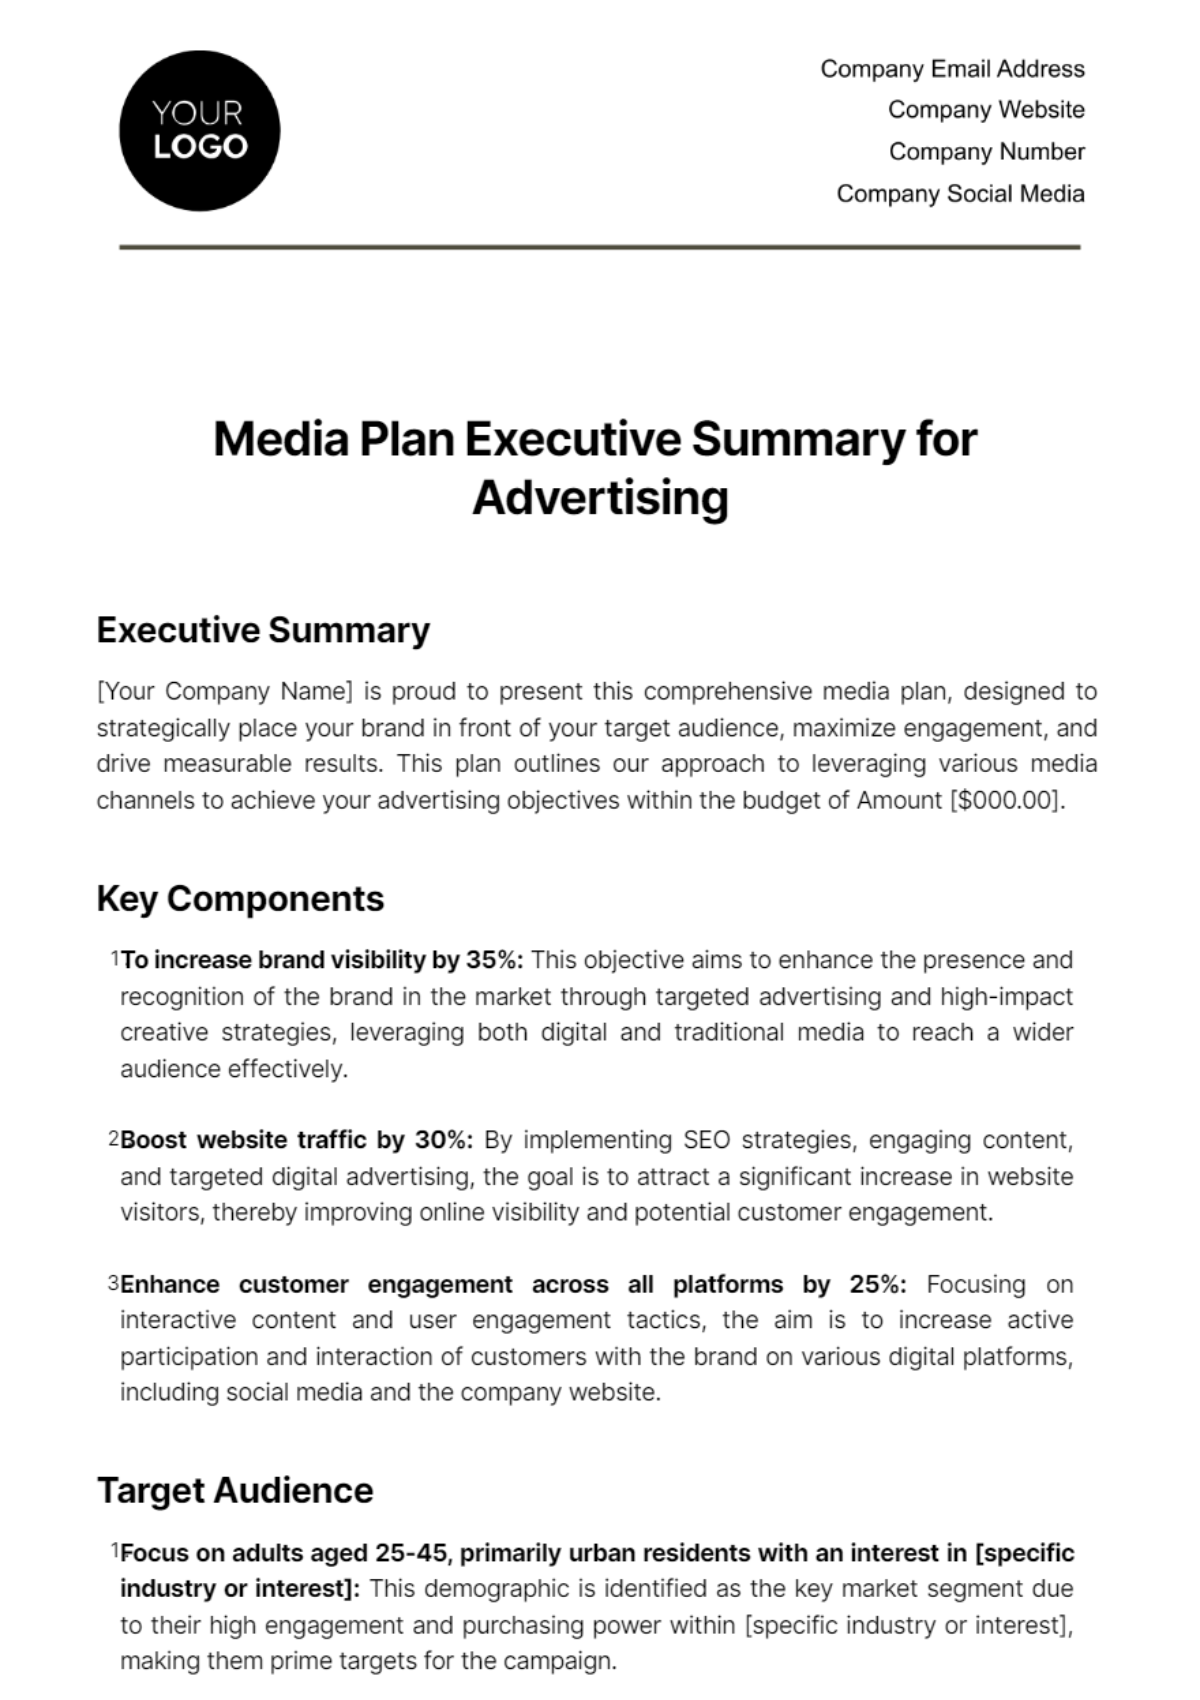 Free Media Plan Executive Summary for Advertising Template